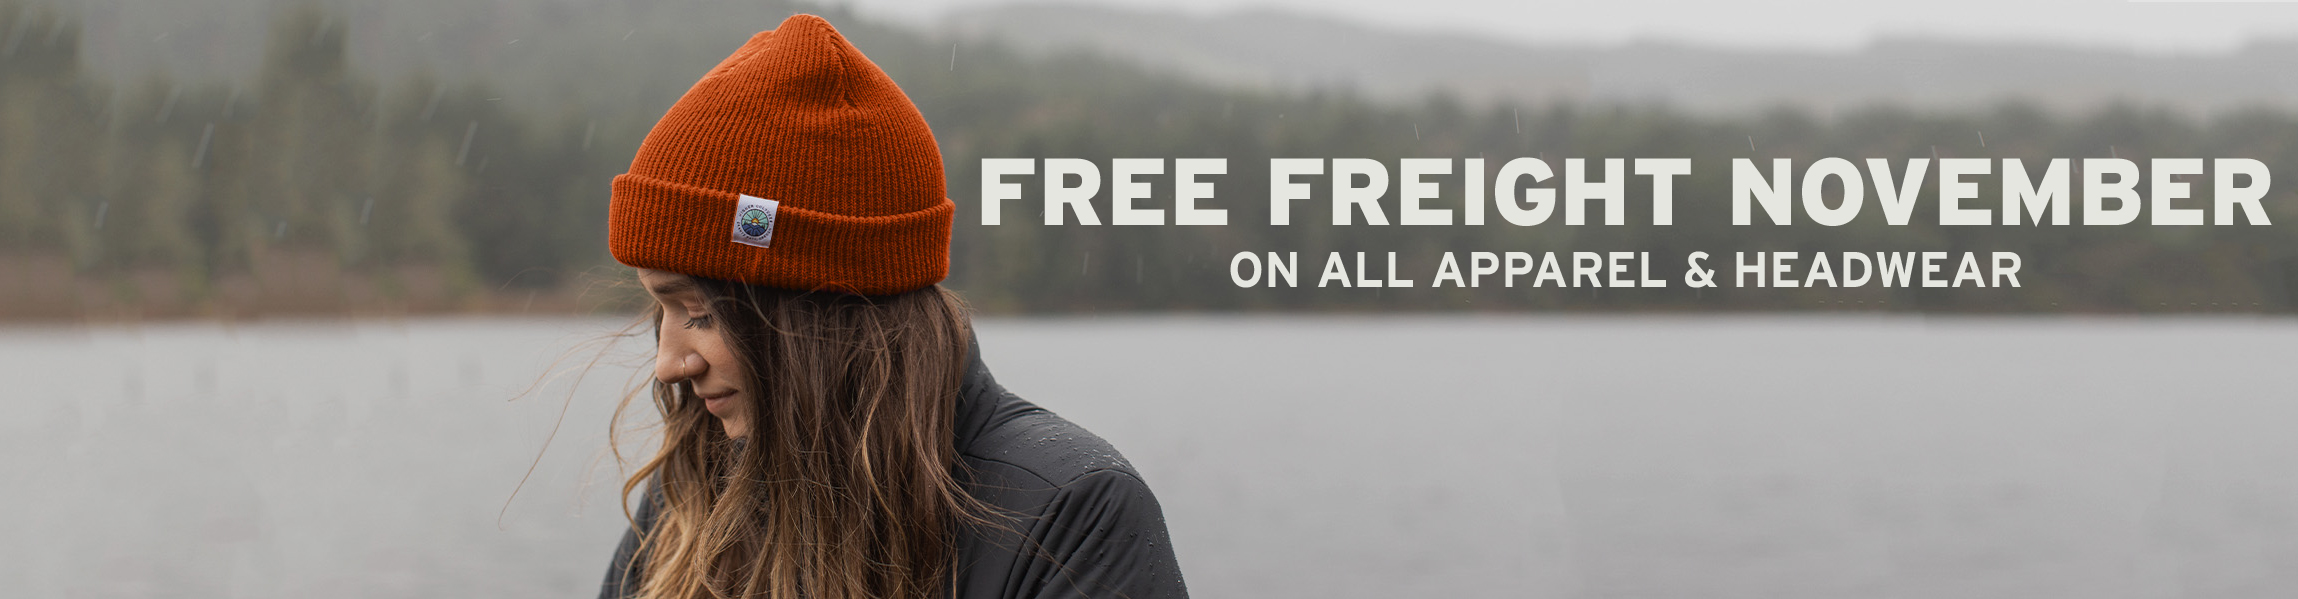 free freight november on all apparel & headwear click for more info